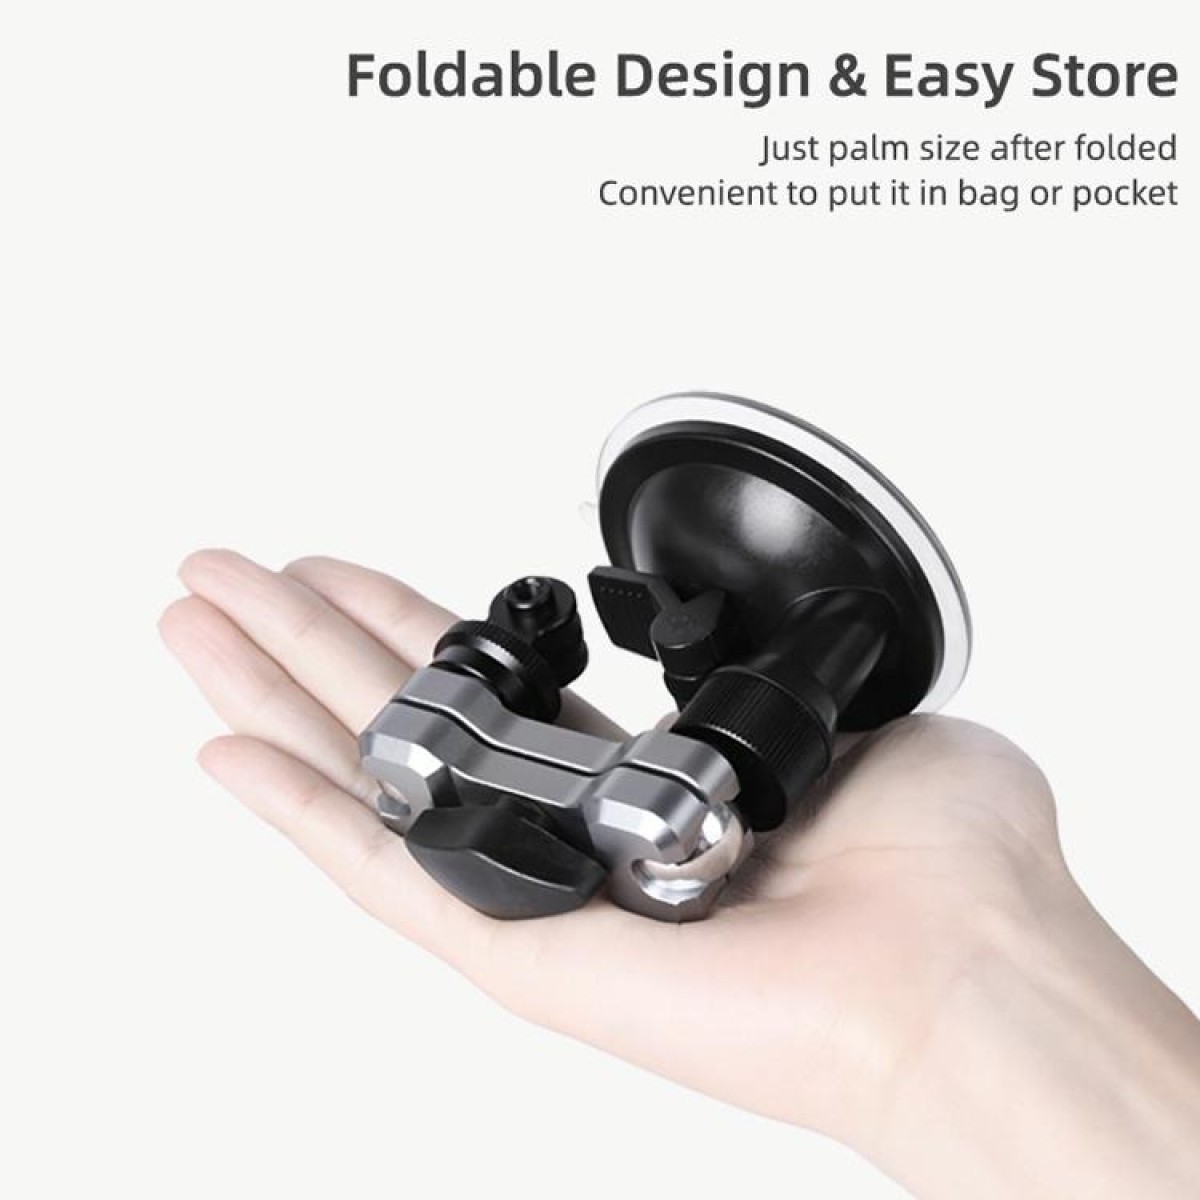 Sunnylife TY-Q9415 Aluminum Alloy Phone Holder Car Suction Cup Bracket Holder for GoPro Hero11 Black / HERO10 Black /9 Black /8 Black /7 /6 /5 /5 Session /4 Session /4 /3+ /3 /2 /1, DJI Osmo Action and Other Action Cameras, Colour: Bracket